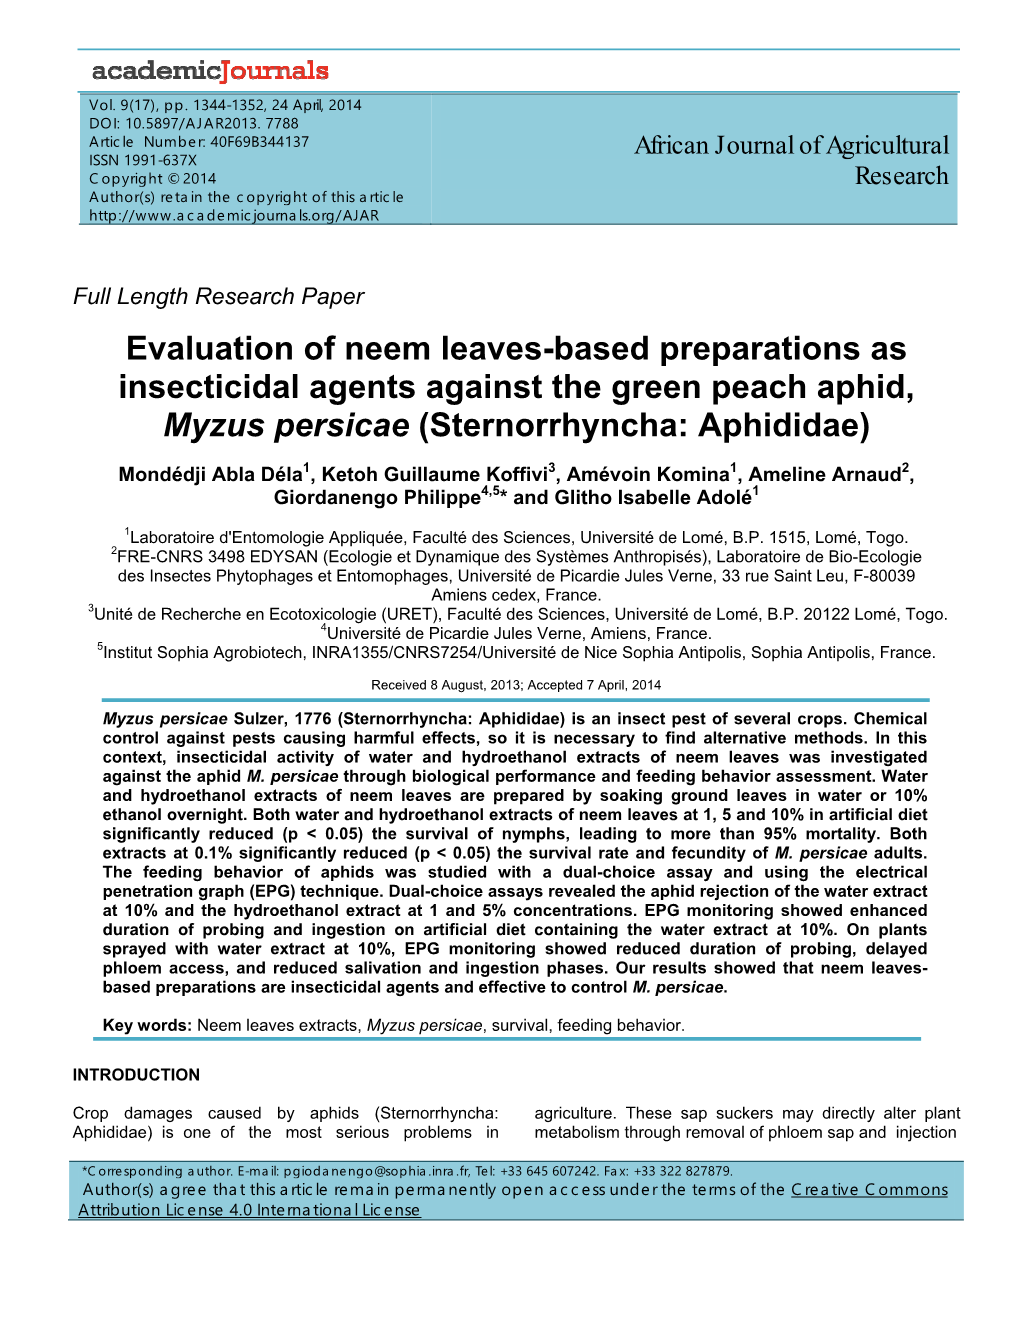 Evaluation of Neem Leaves-Based Preparations As Insecticidal Agents Against the Green Peach Aphid, Myzus Persicae (Sternorrhyncha: Aphididae)